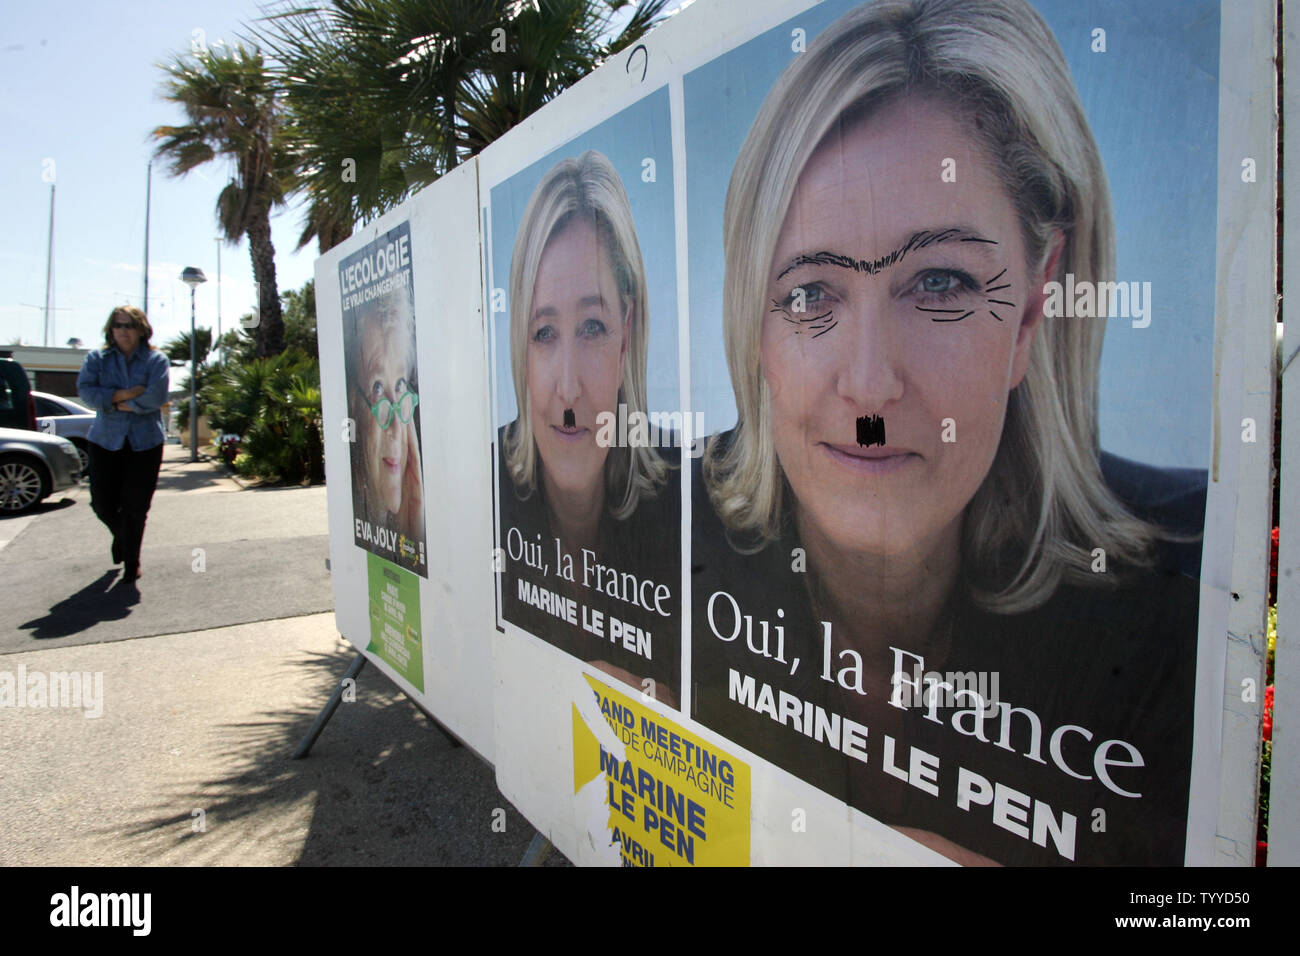 Wat dan ook interieur identificatie A woman walks past defaced campaign posters of ultra-right candidate Marine  Le Pen French people on the day of the first round of presidential  elections in the southern city of Hyeres, France,